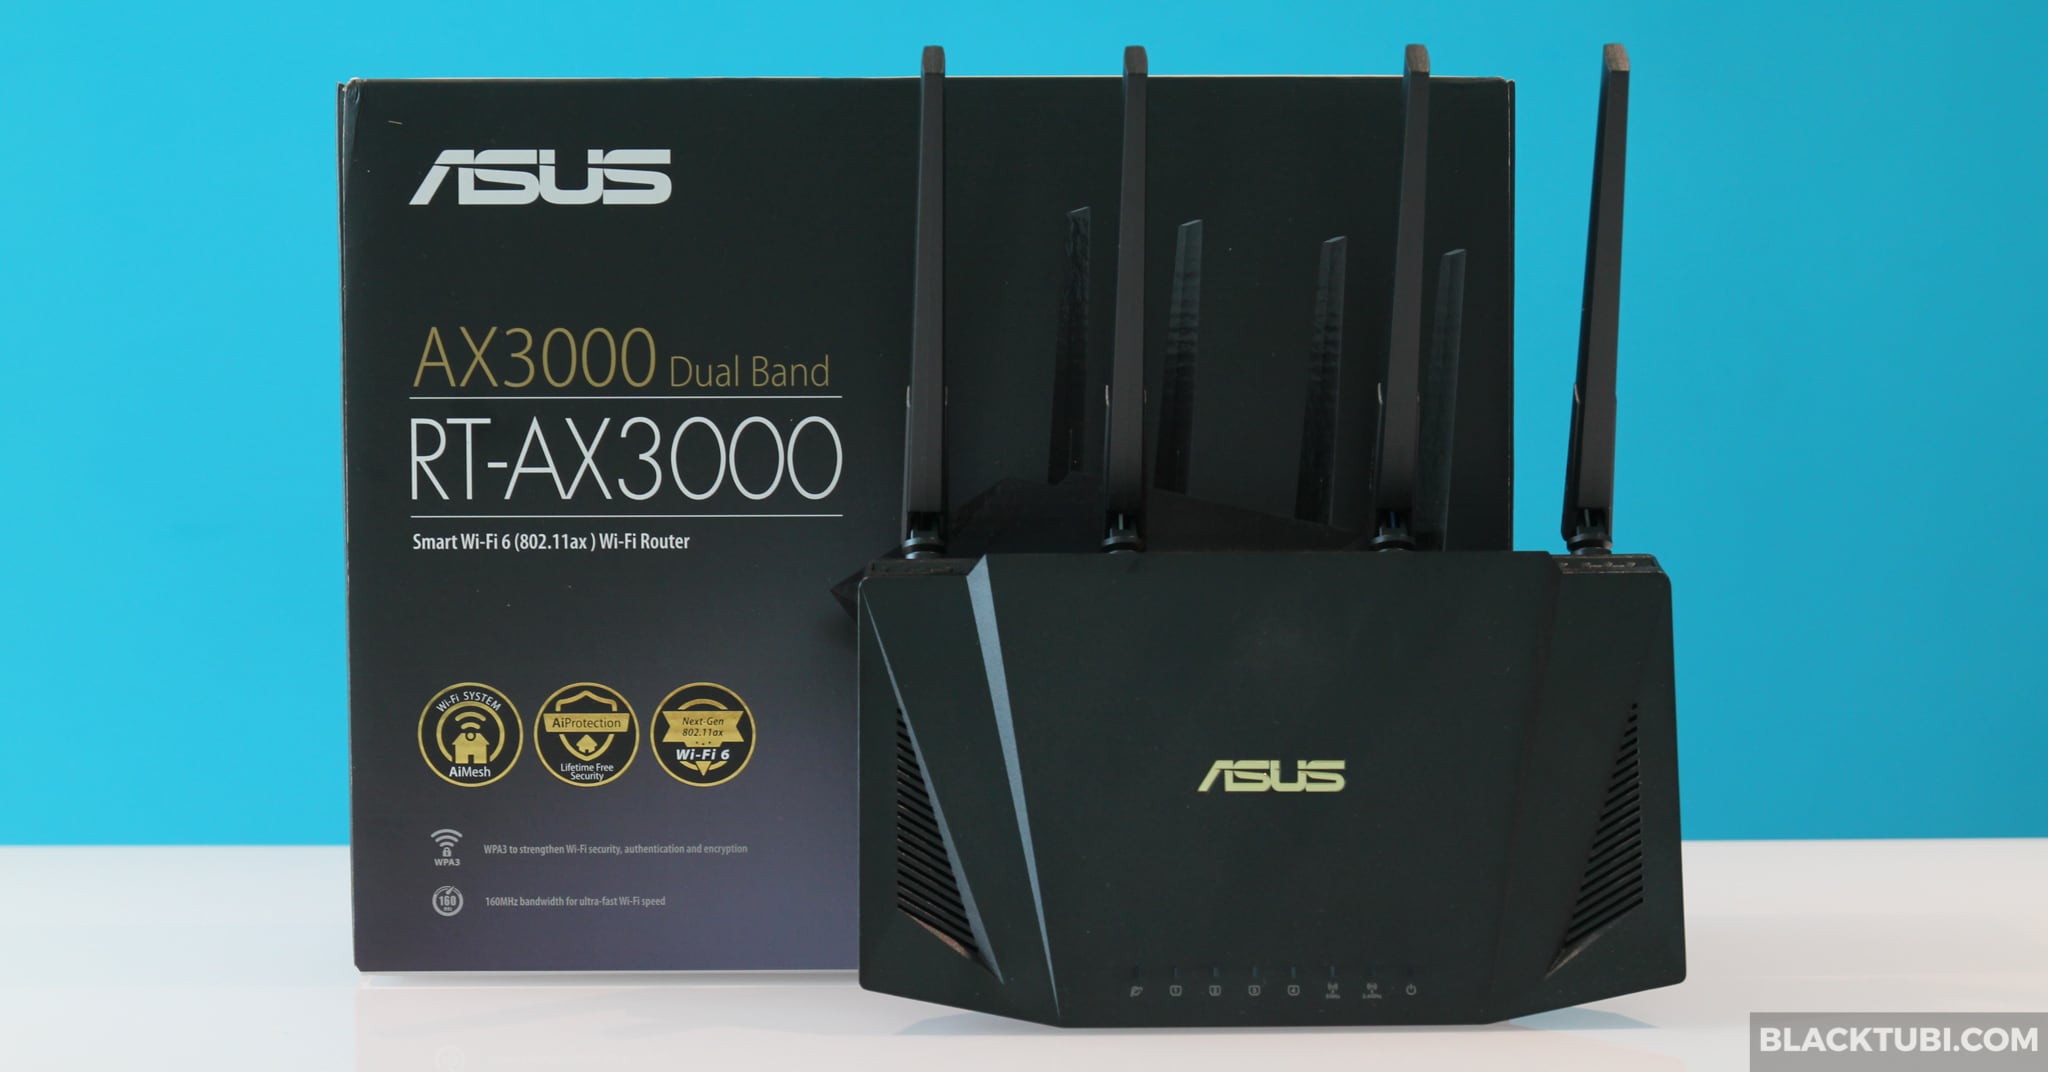 ASUS RT-AX3000 WiFi 6 Router Review - Blacktubi